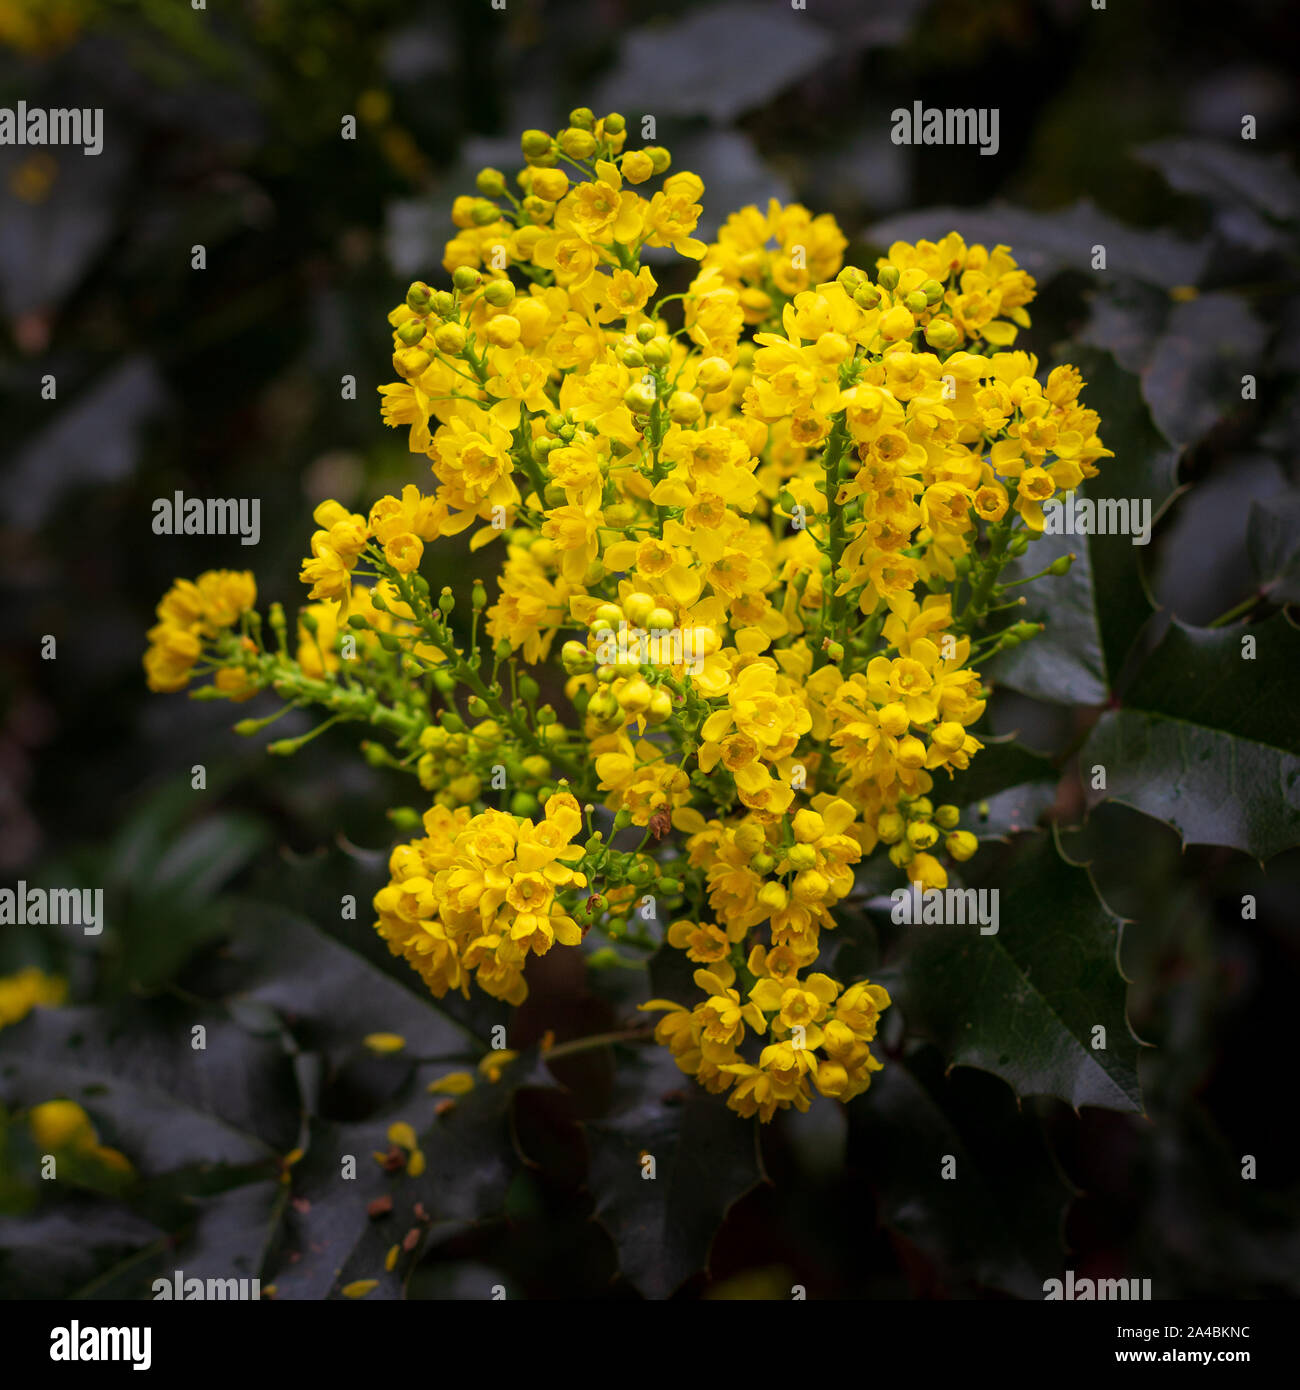 Clusters of small yellow flowers on a plant Stock Photo